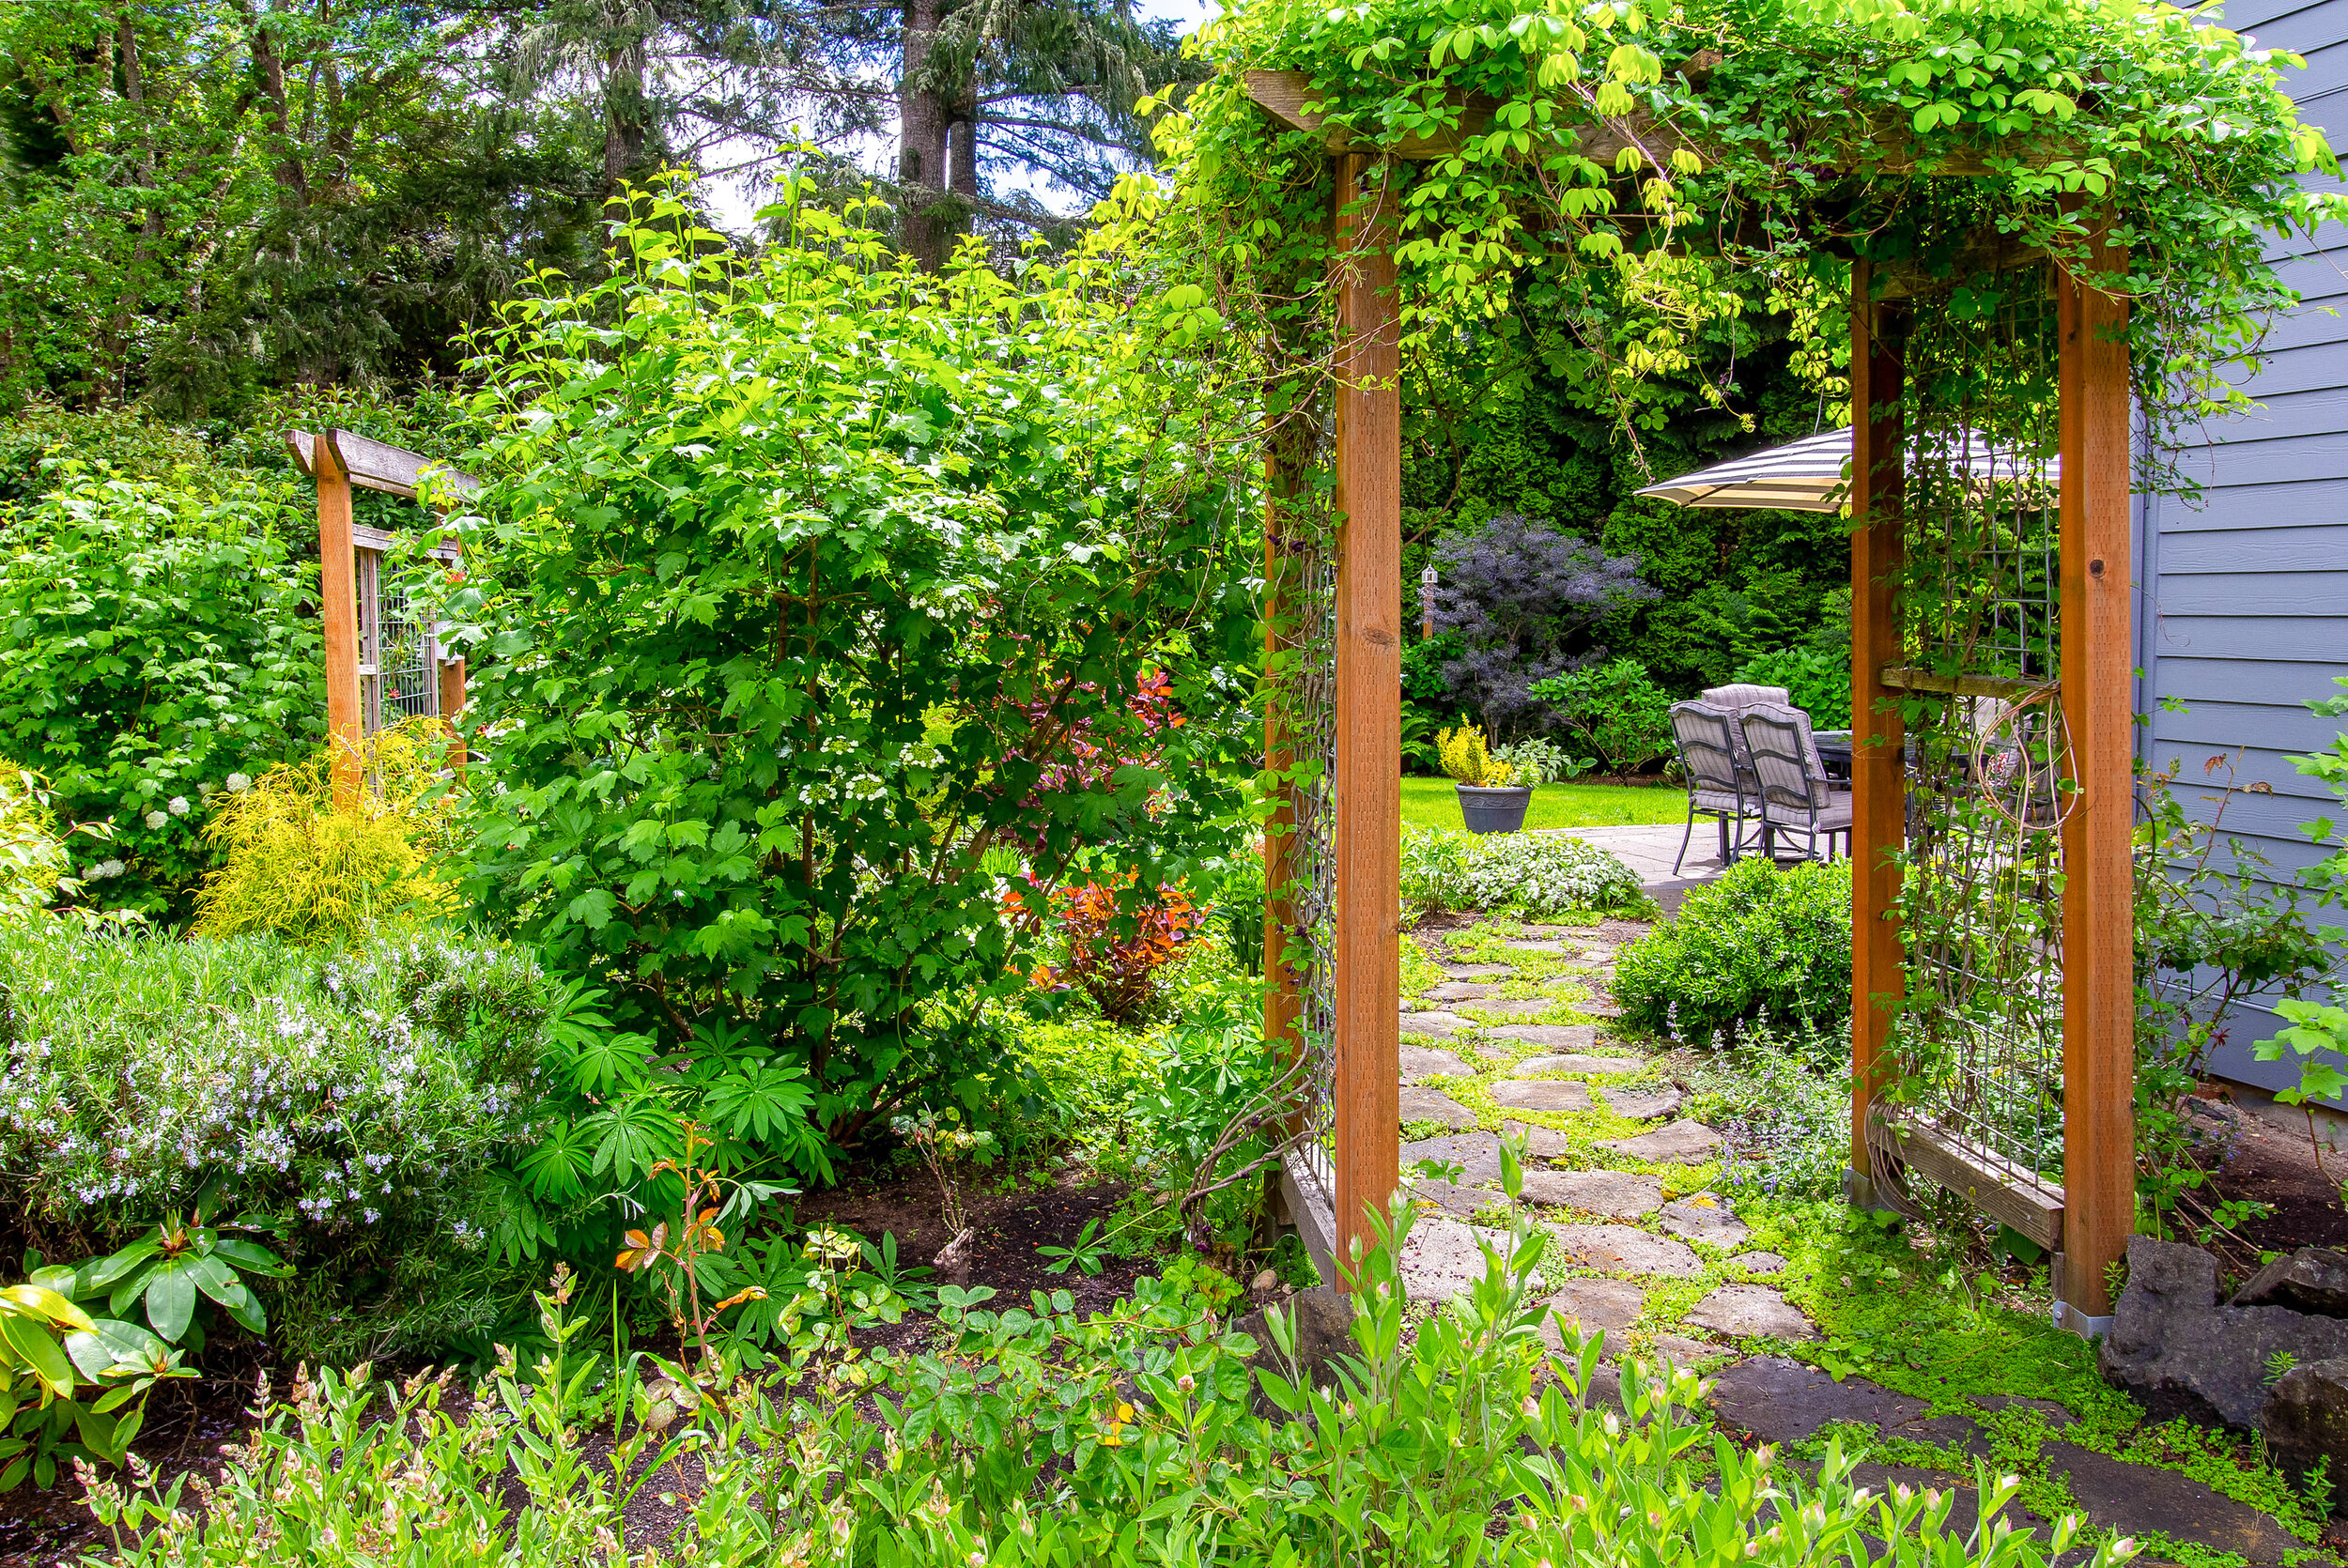  Indulge in the intricate landscaping as the garden comes into full bloom from spring through summer.&nbsp; 